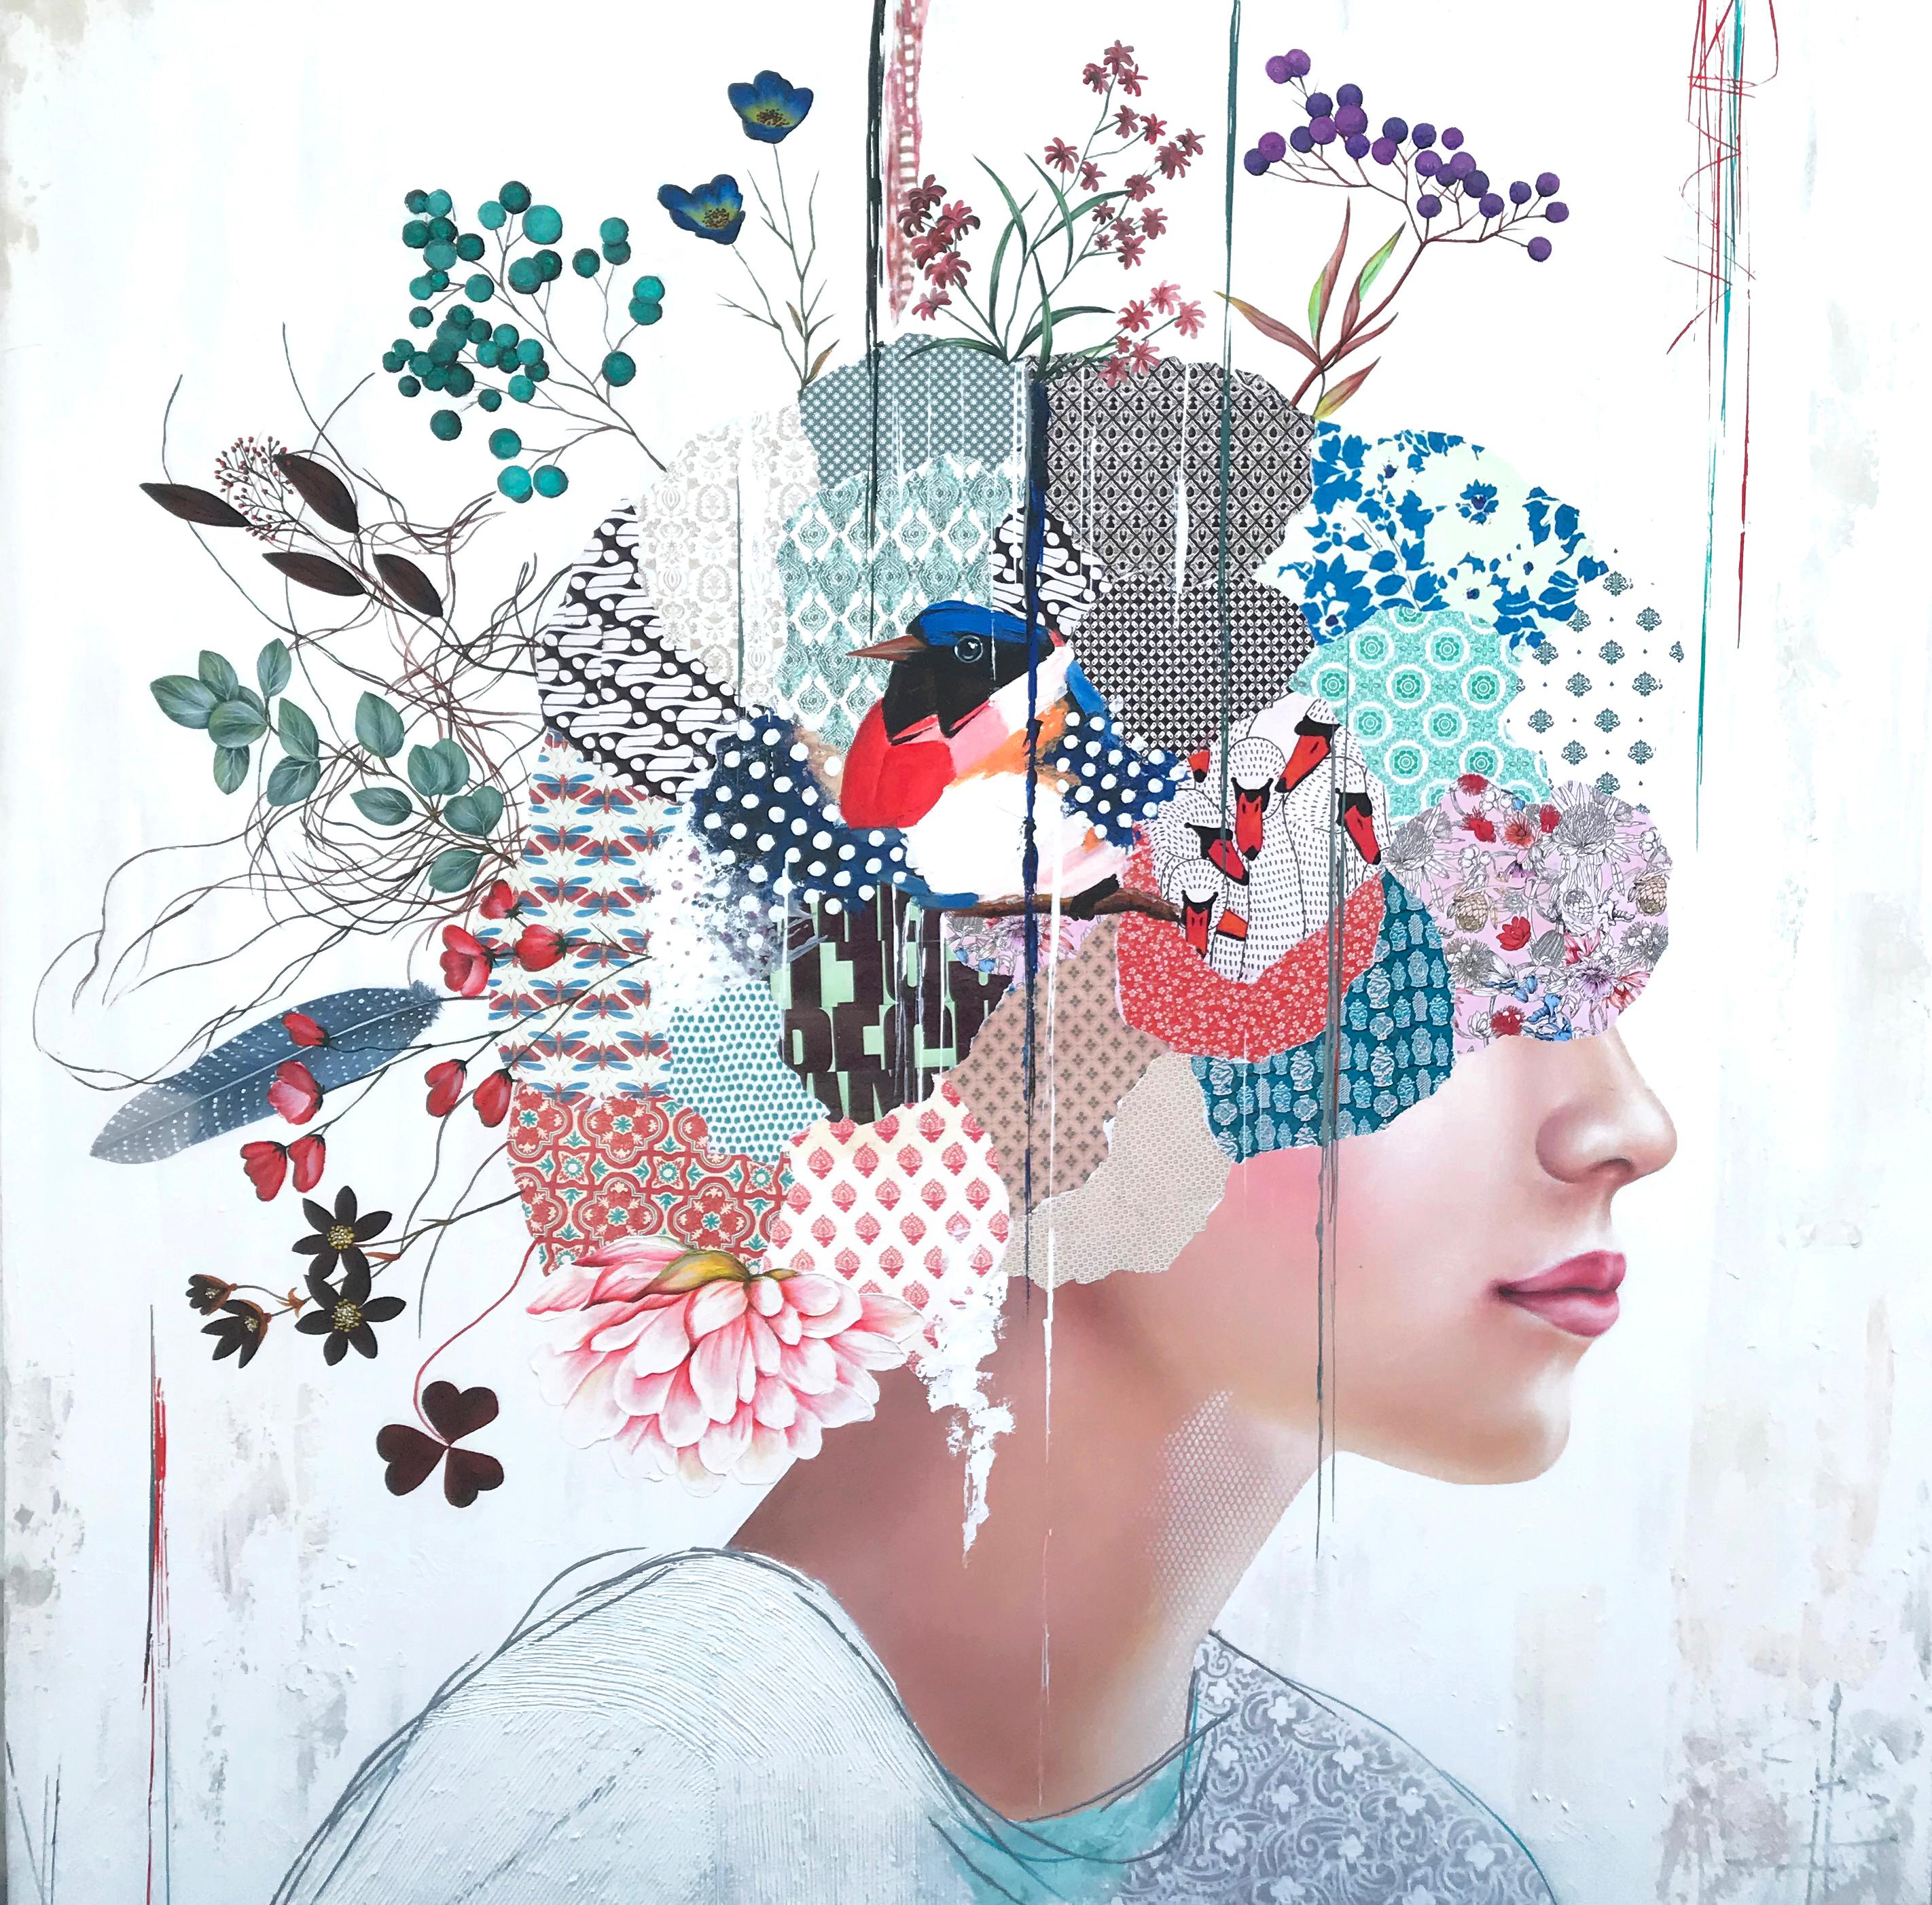 "Bird's Eye" mysterious mixed media portrait of a female with floral collage - Mixed Media Art by Irene Hoff